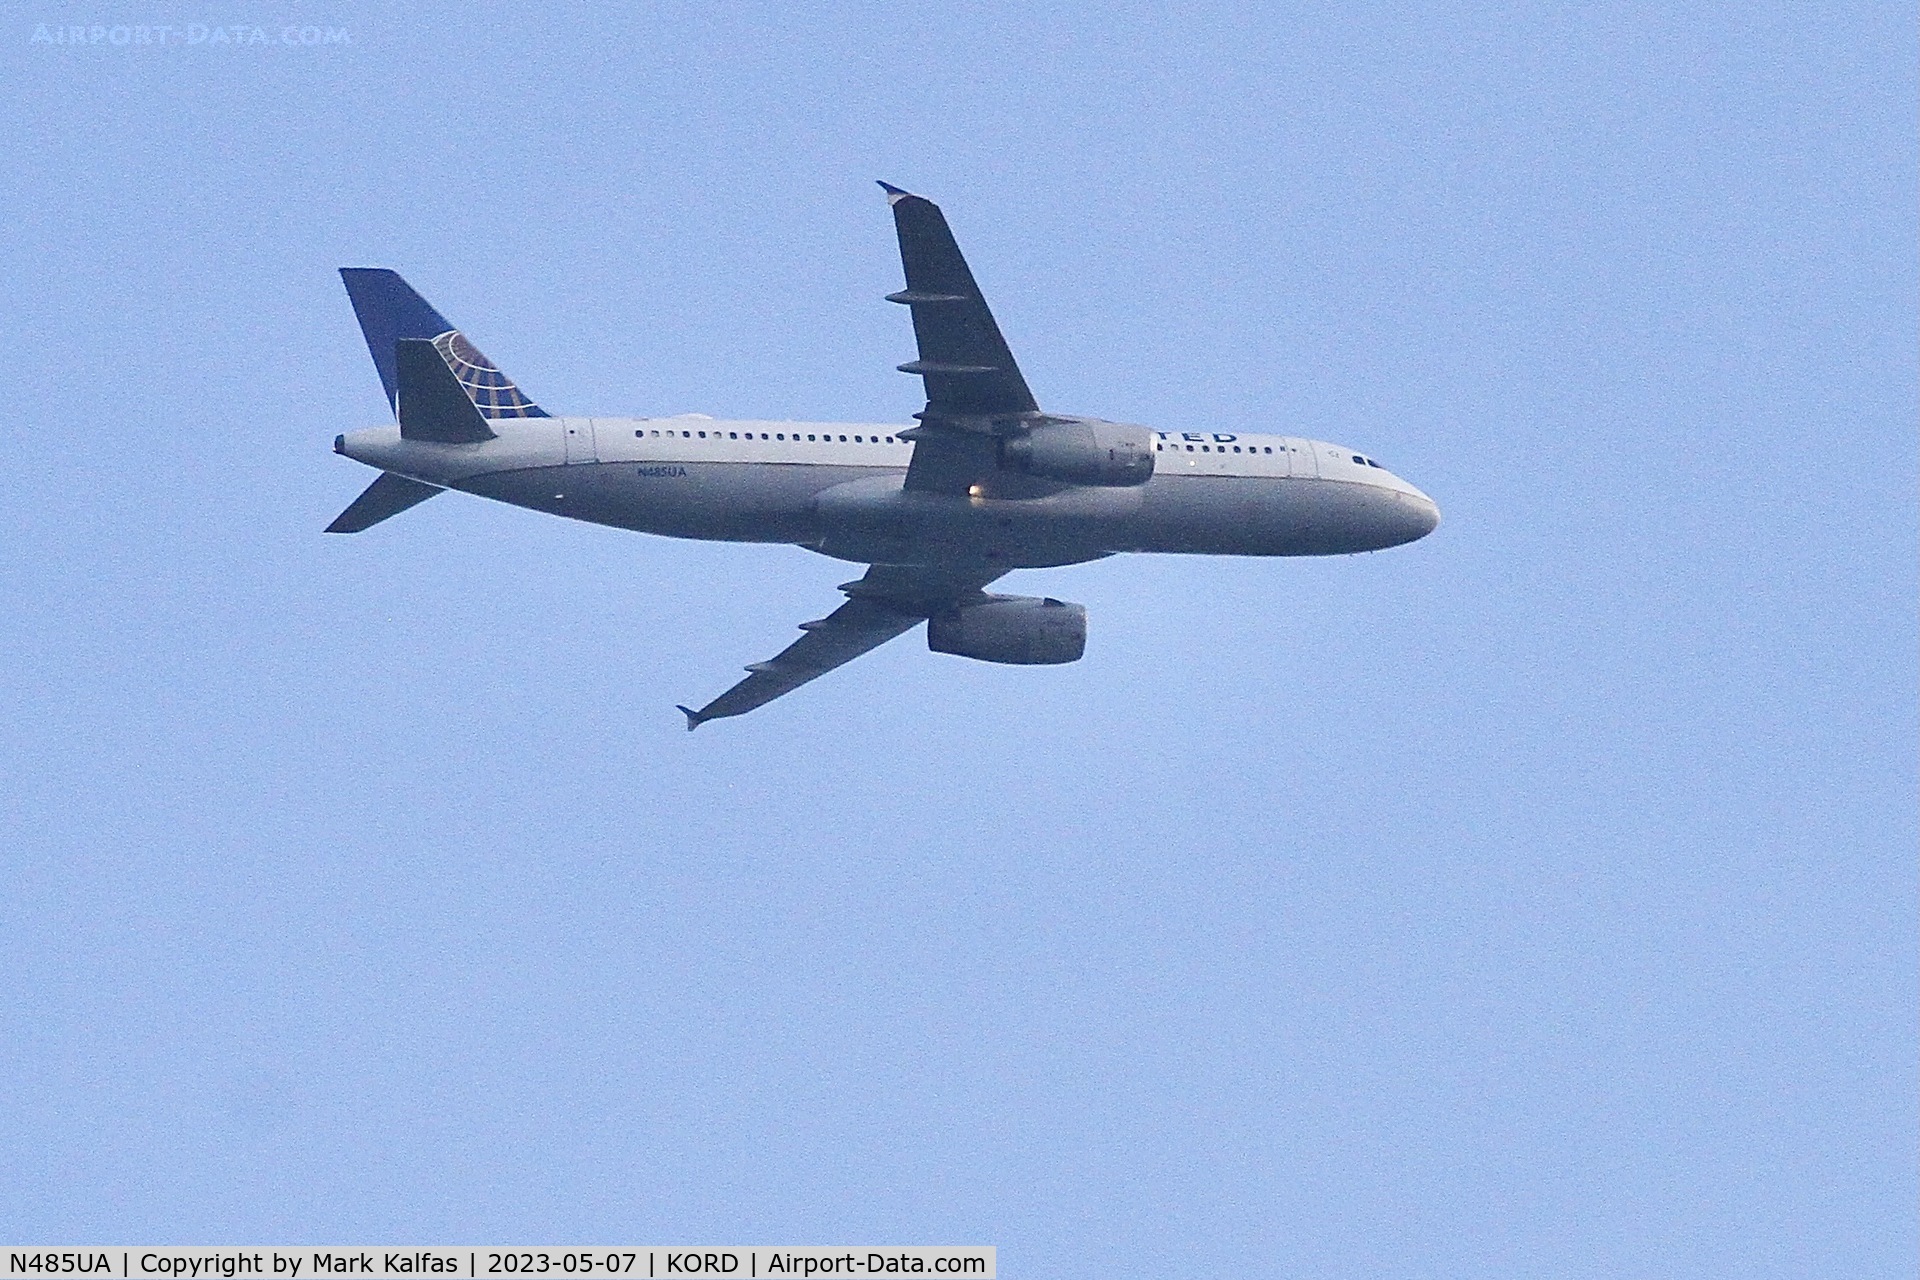 N485UA, 2001 Airbus A320-232 C/N 1617, United Airlines A320 N485UA, operating as UA2422 from NAS to ORD, on approach to ORD